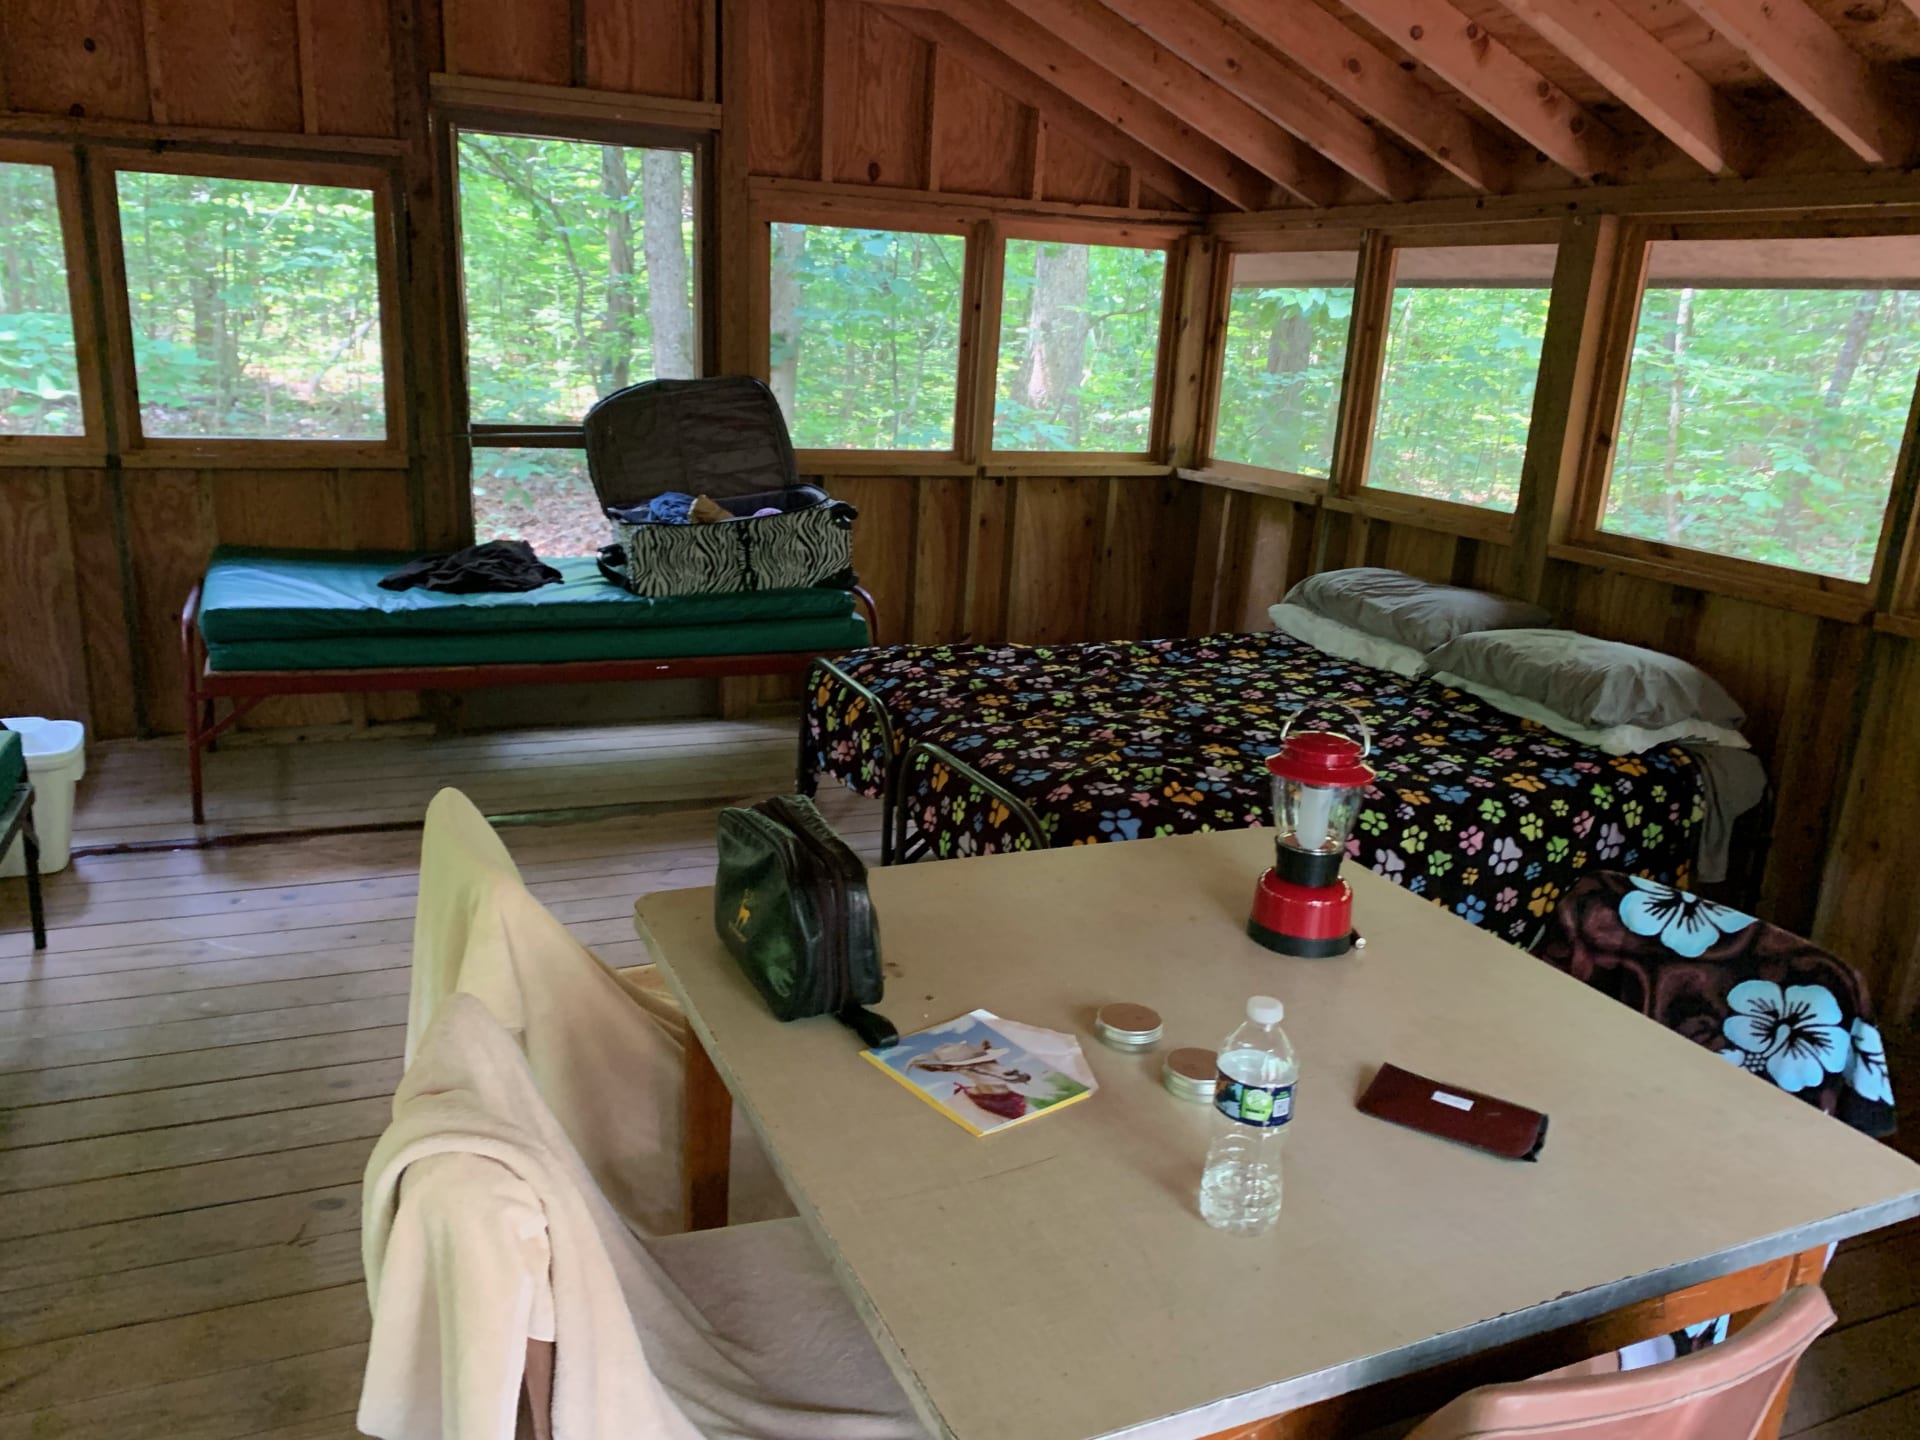 Each cabin has 6 cots with mattresses. Bring your own sleeping bag/sheets/pillows